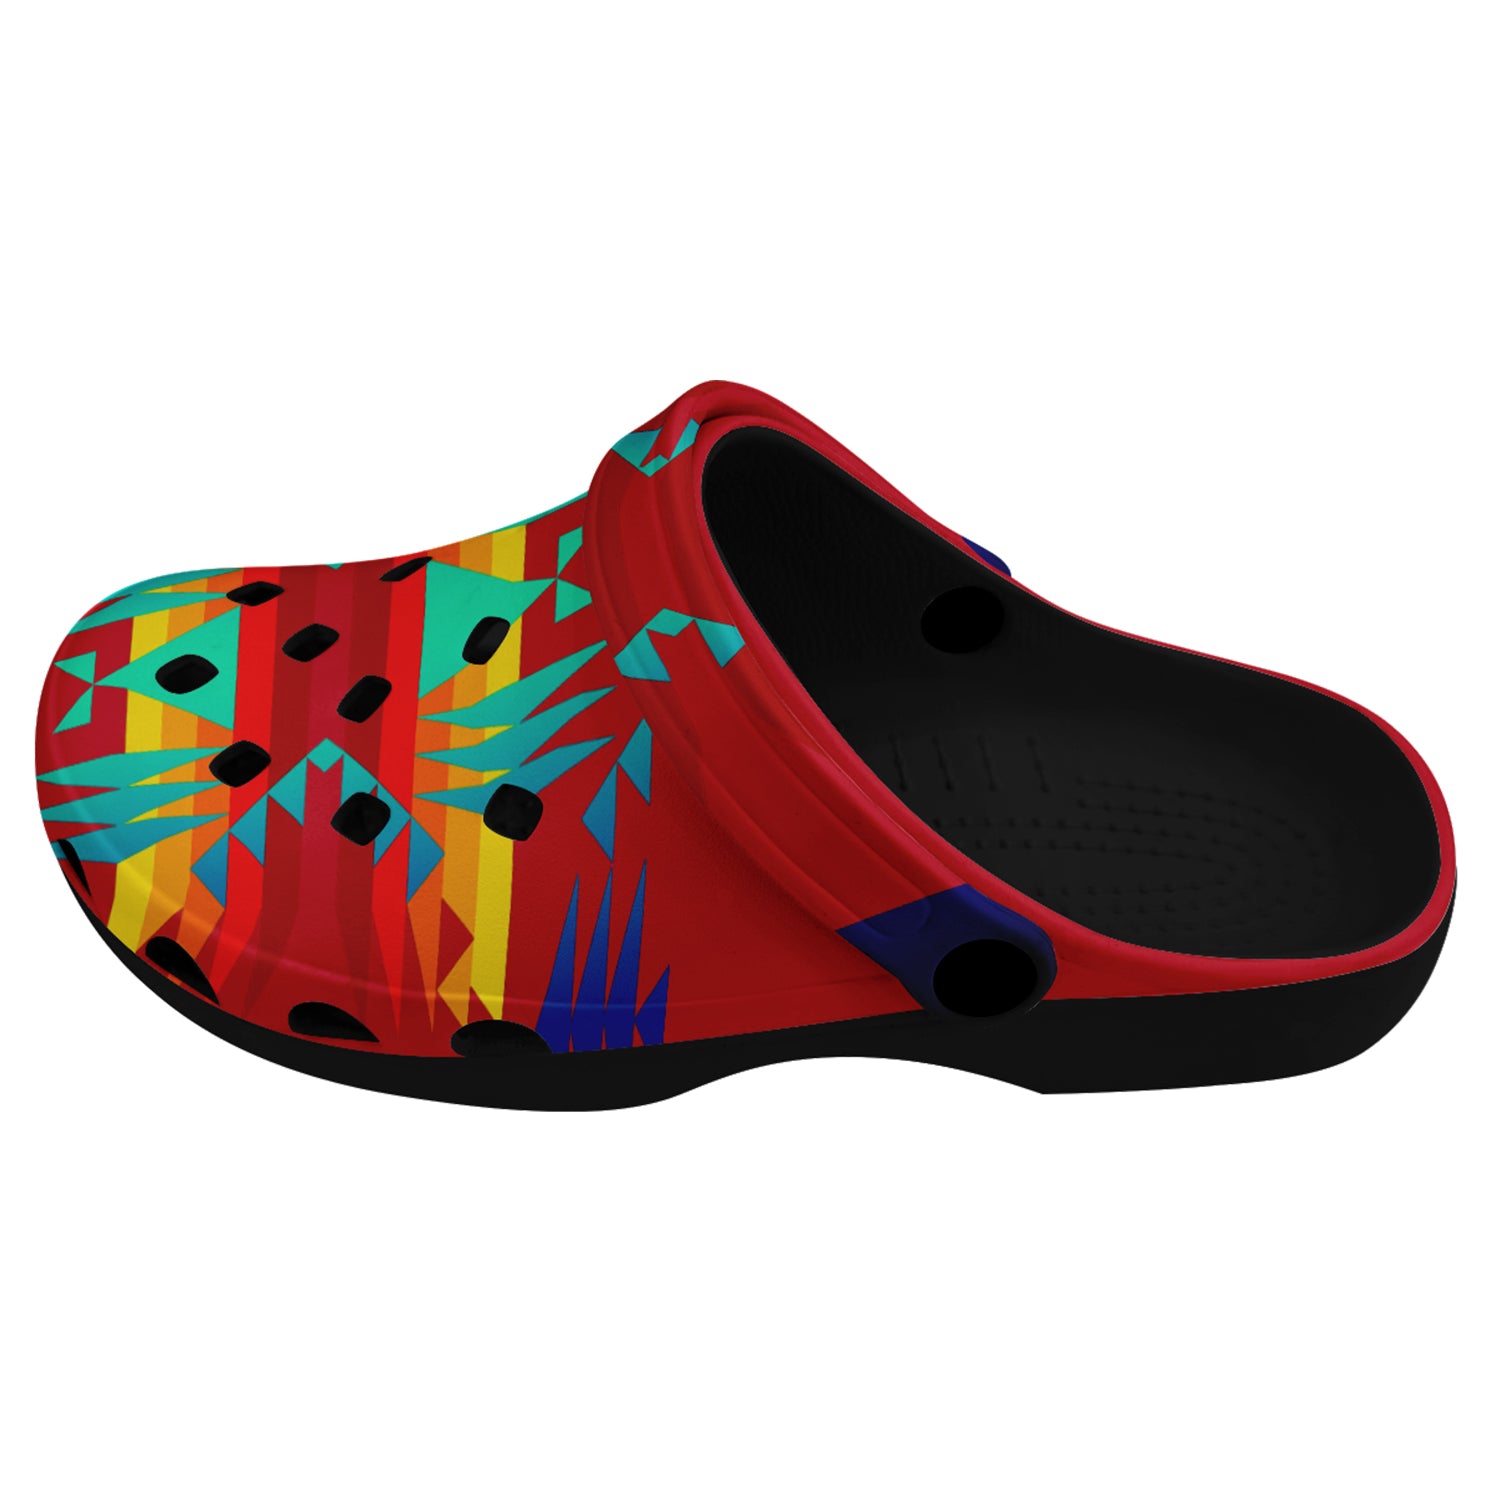 Between the Mountains Red Muddies Unisex Clog Shoes